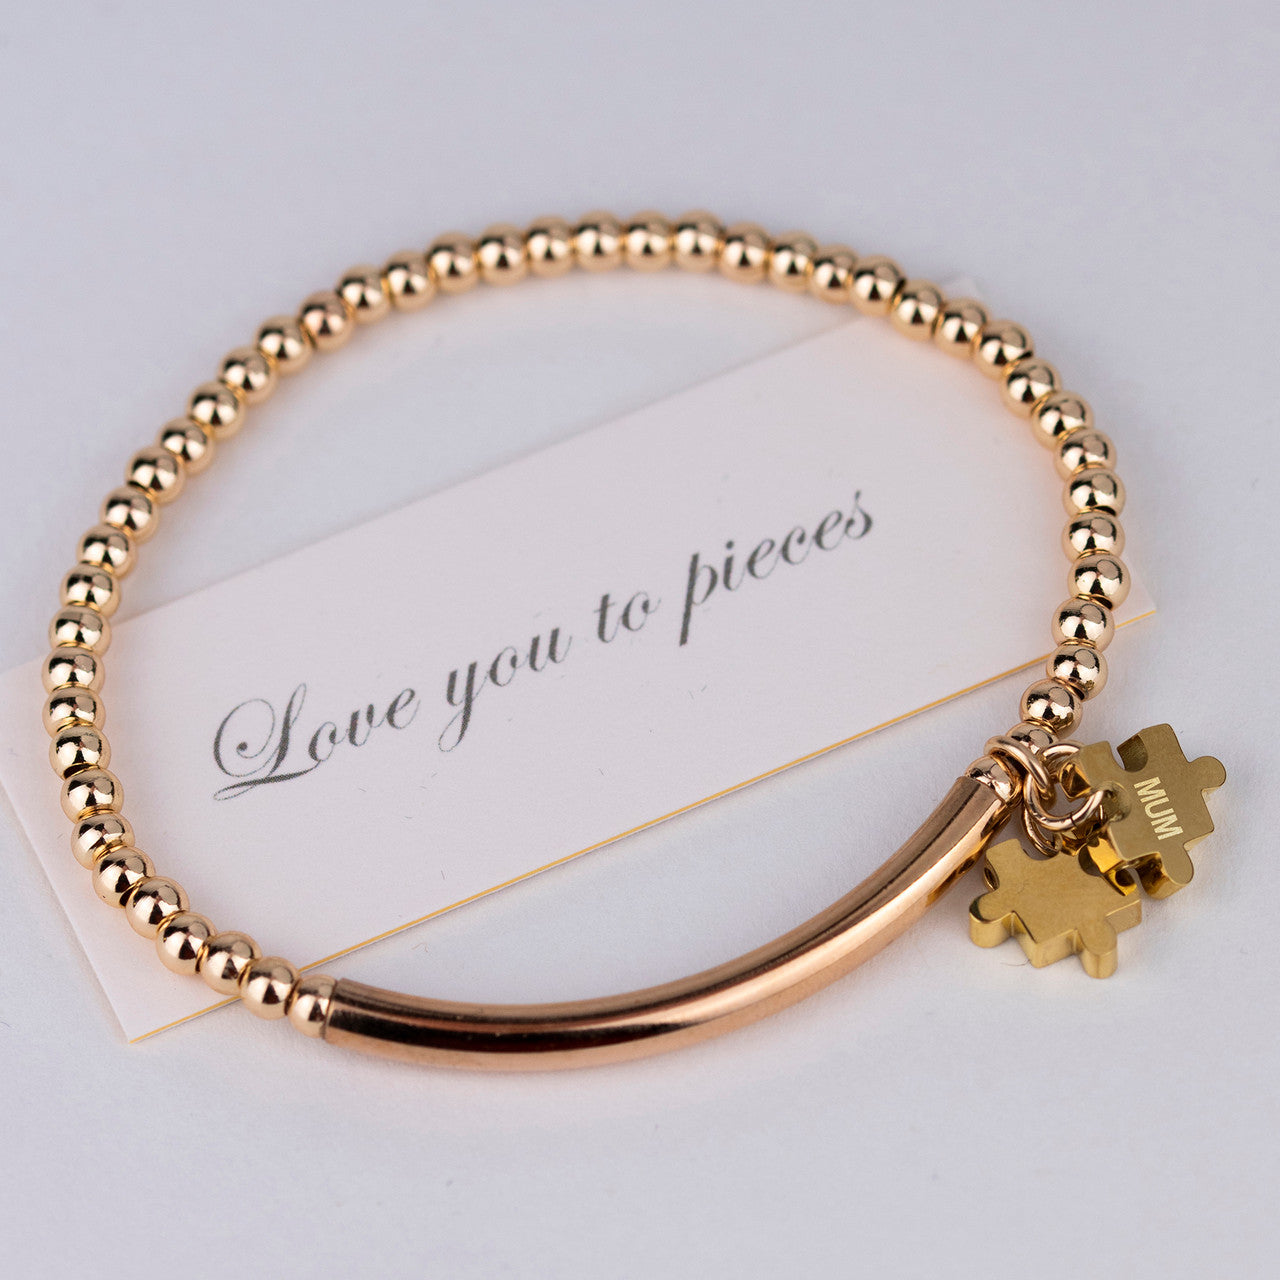 Love you to pieces bead and bar bracelet shown in gold, with one jigsaw charm engraved Mum, and accompanying love you to pieces card